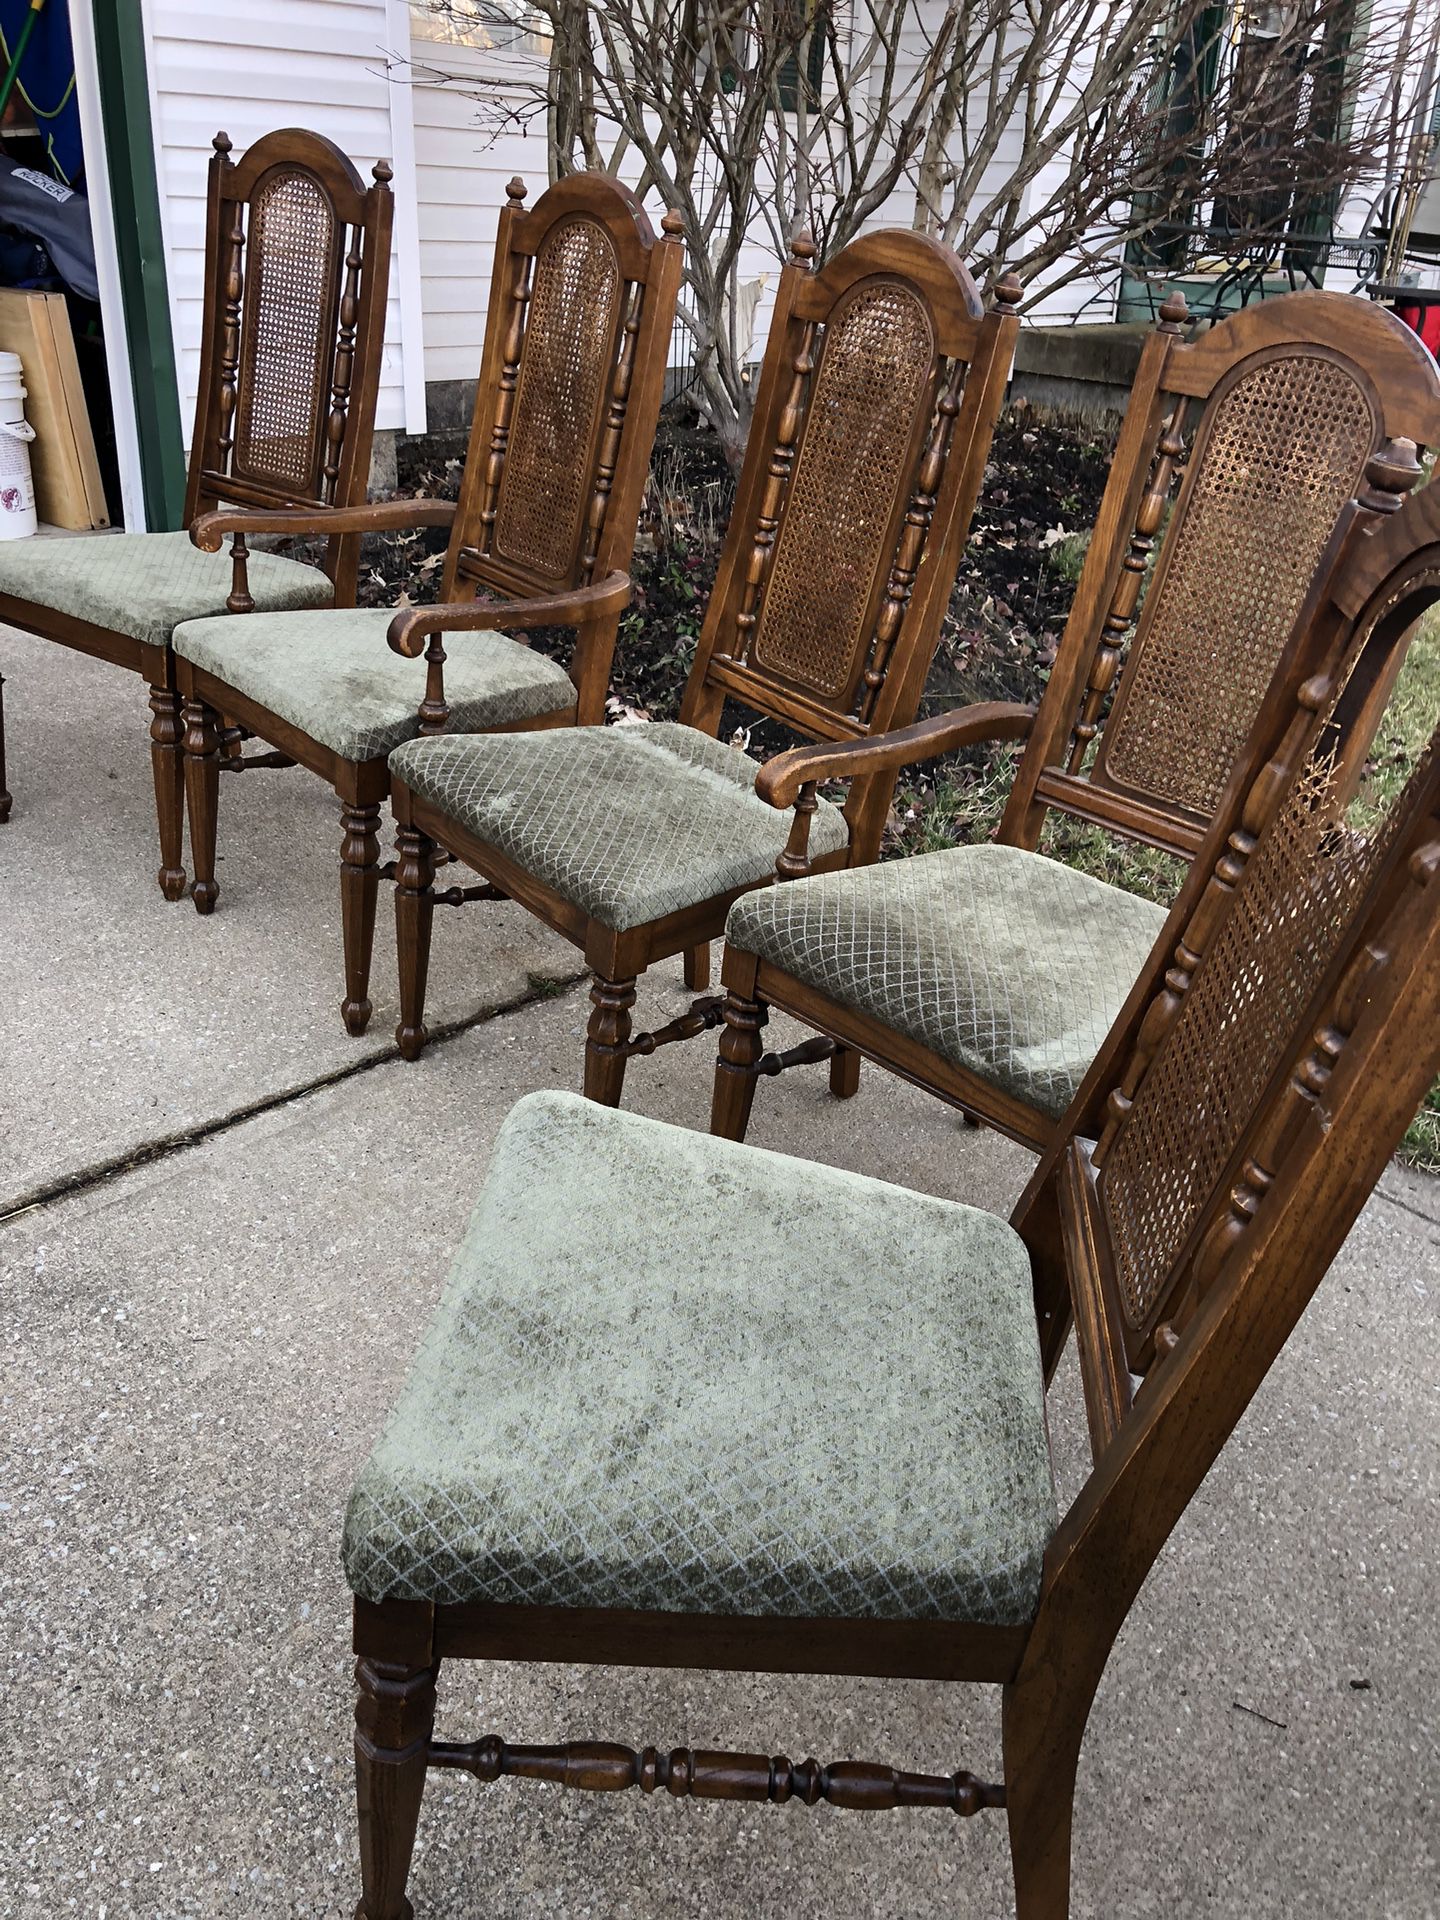 6 Chairs- $25